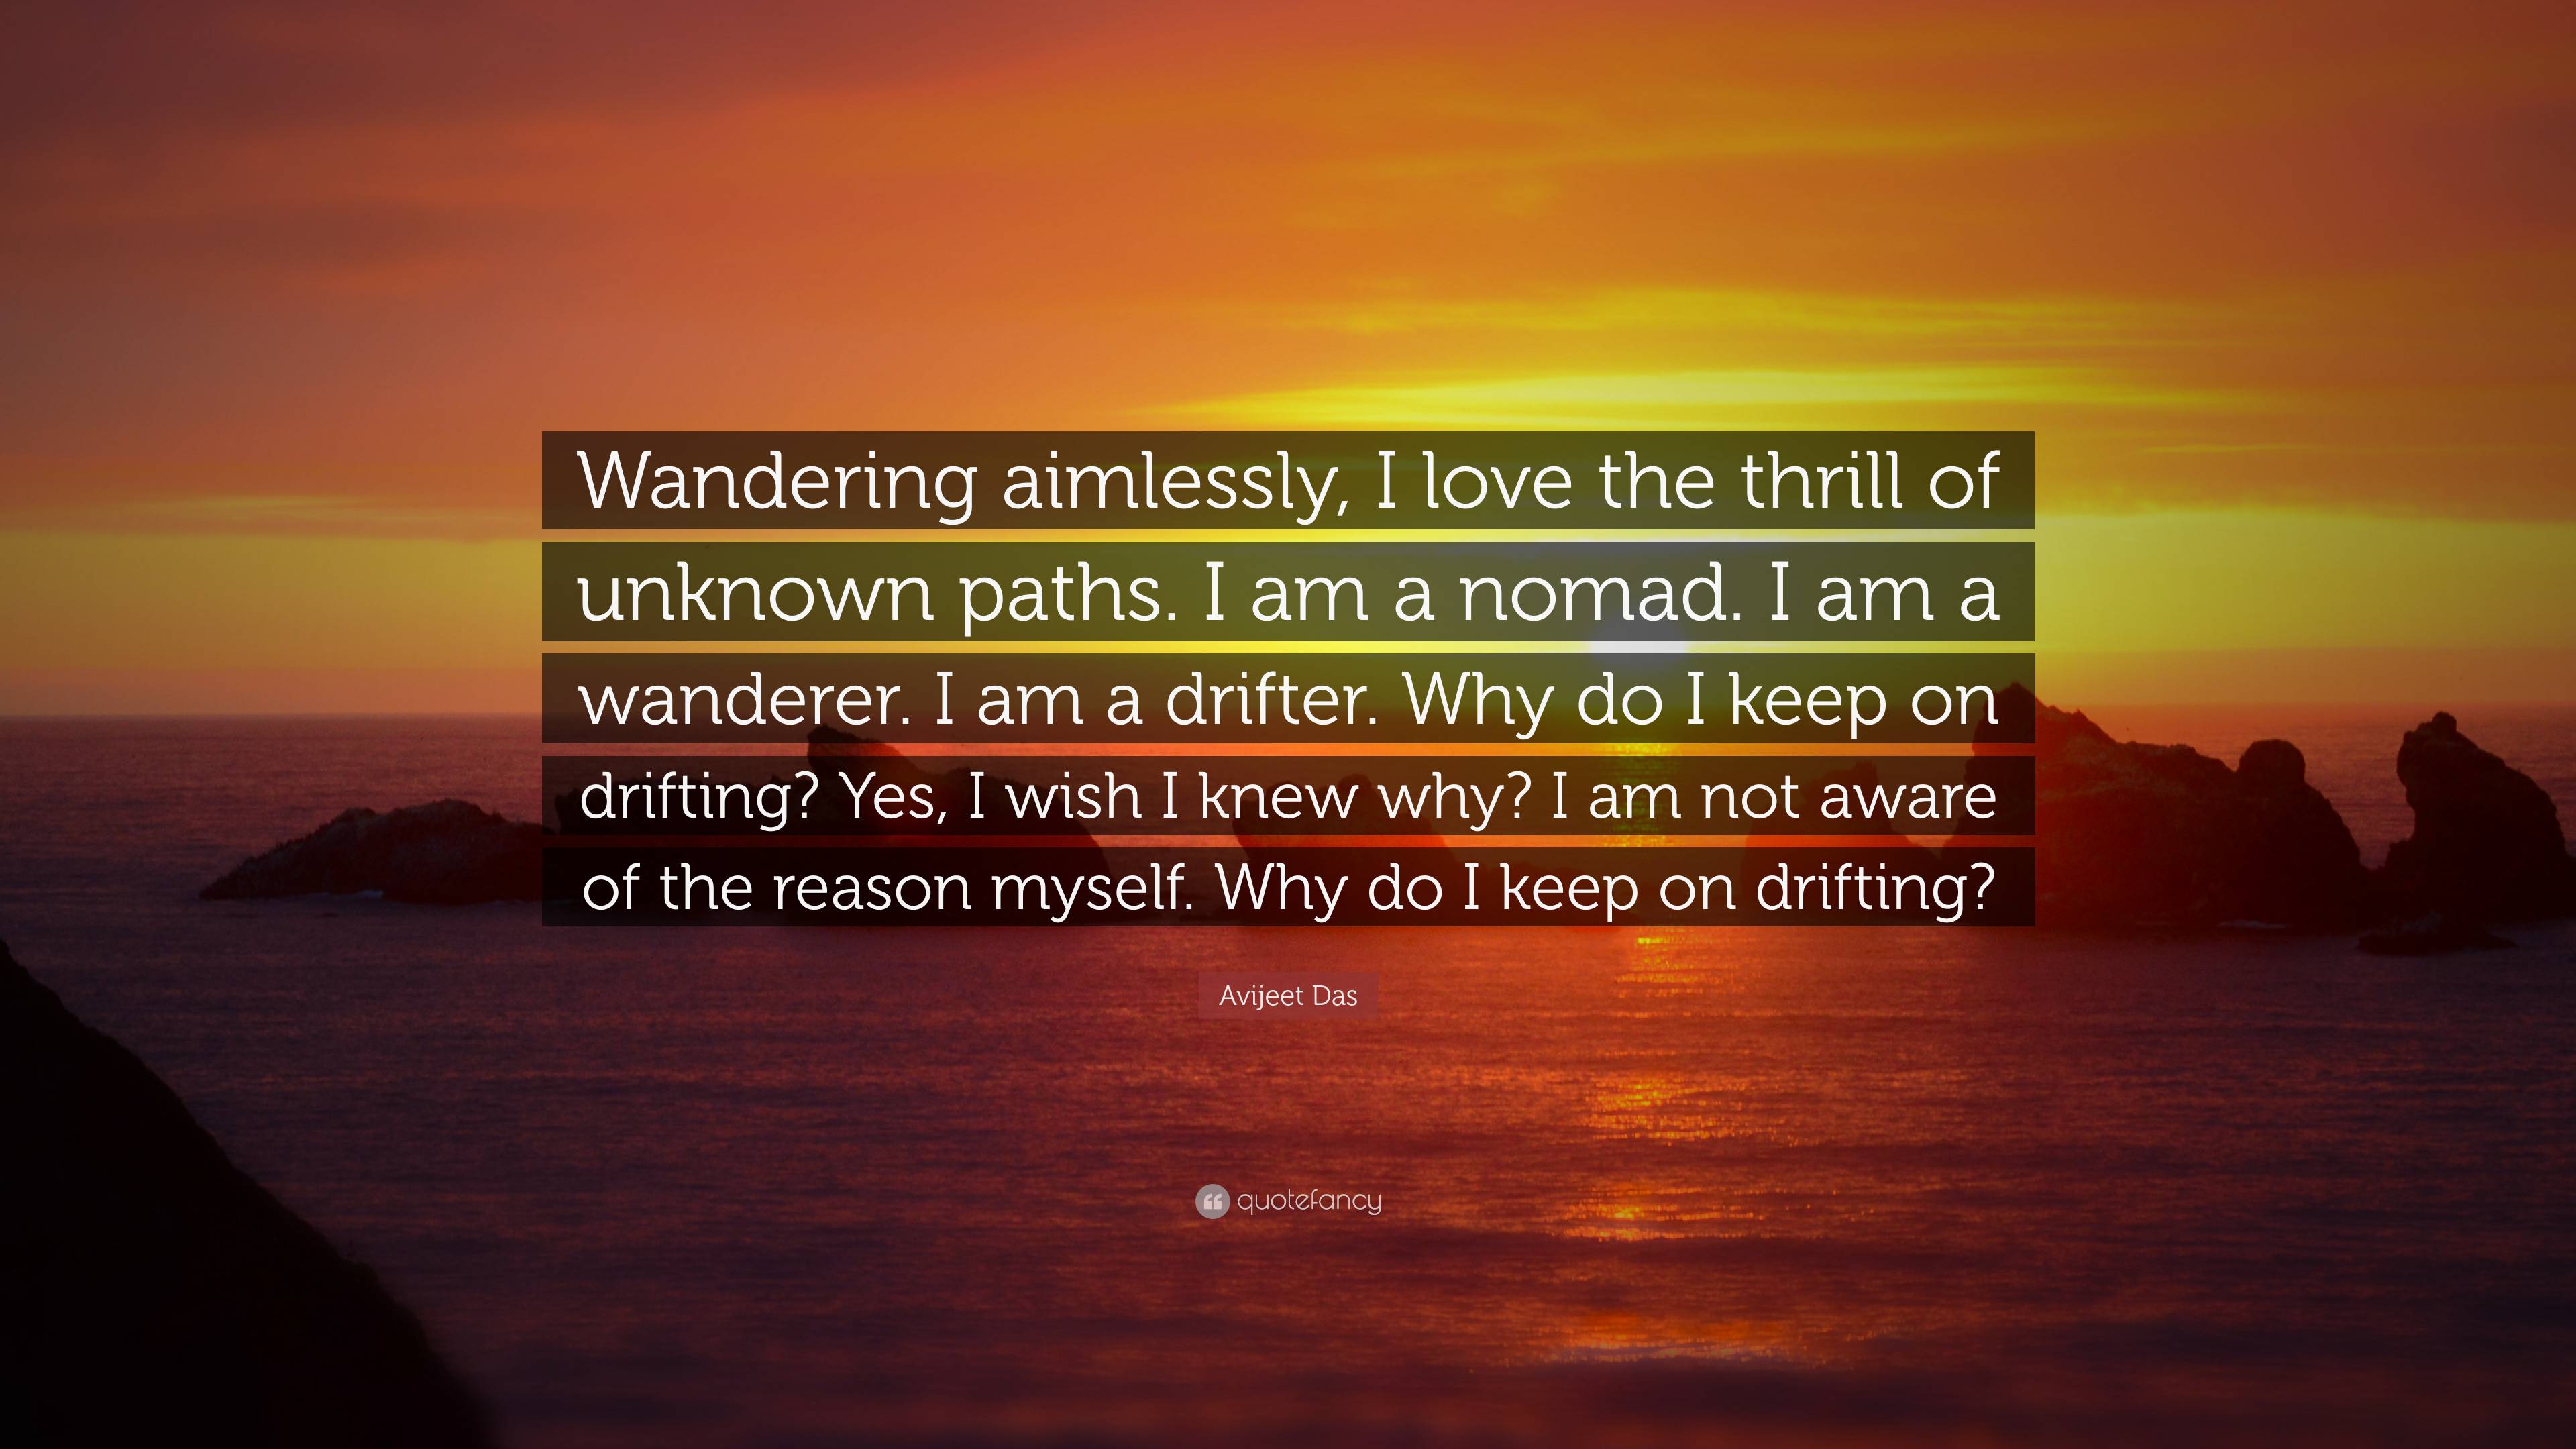 wandering aimlessly is an expression of